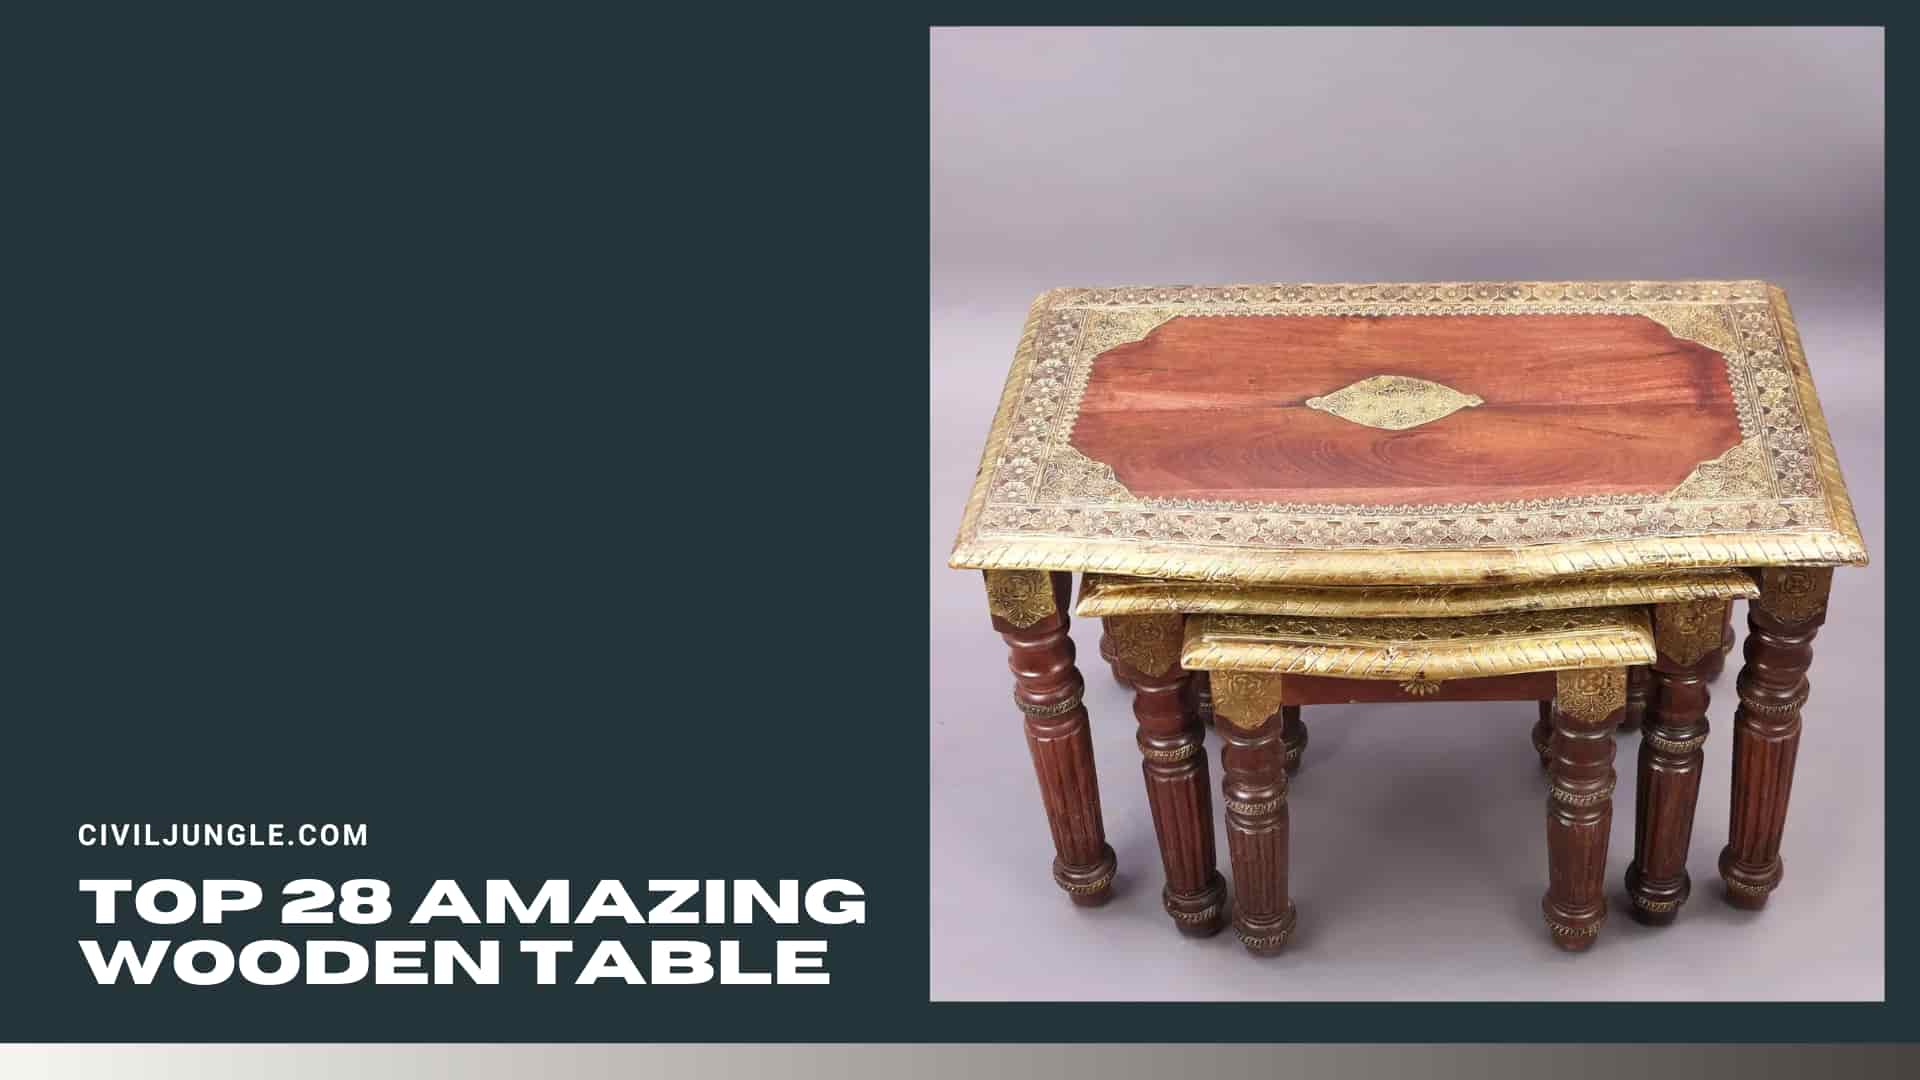 Top 28 Amazing Wooden Table